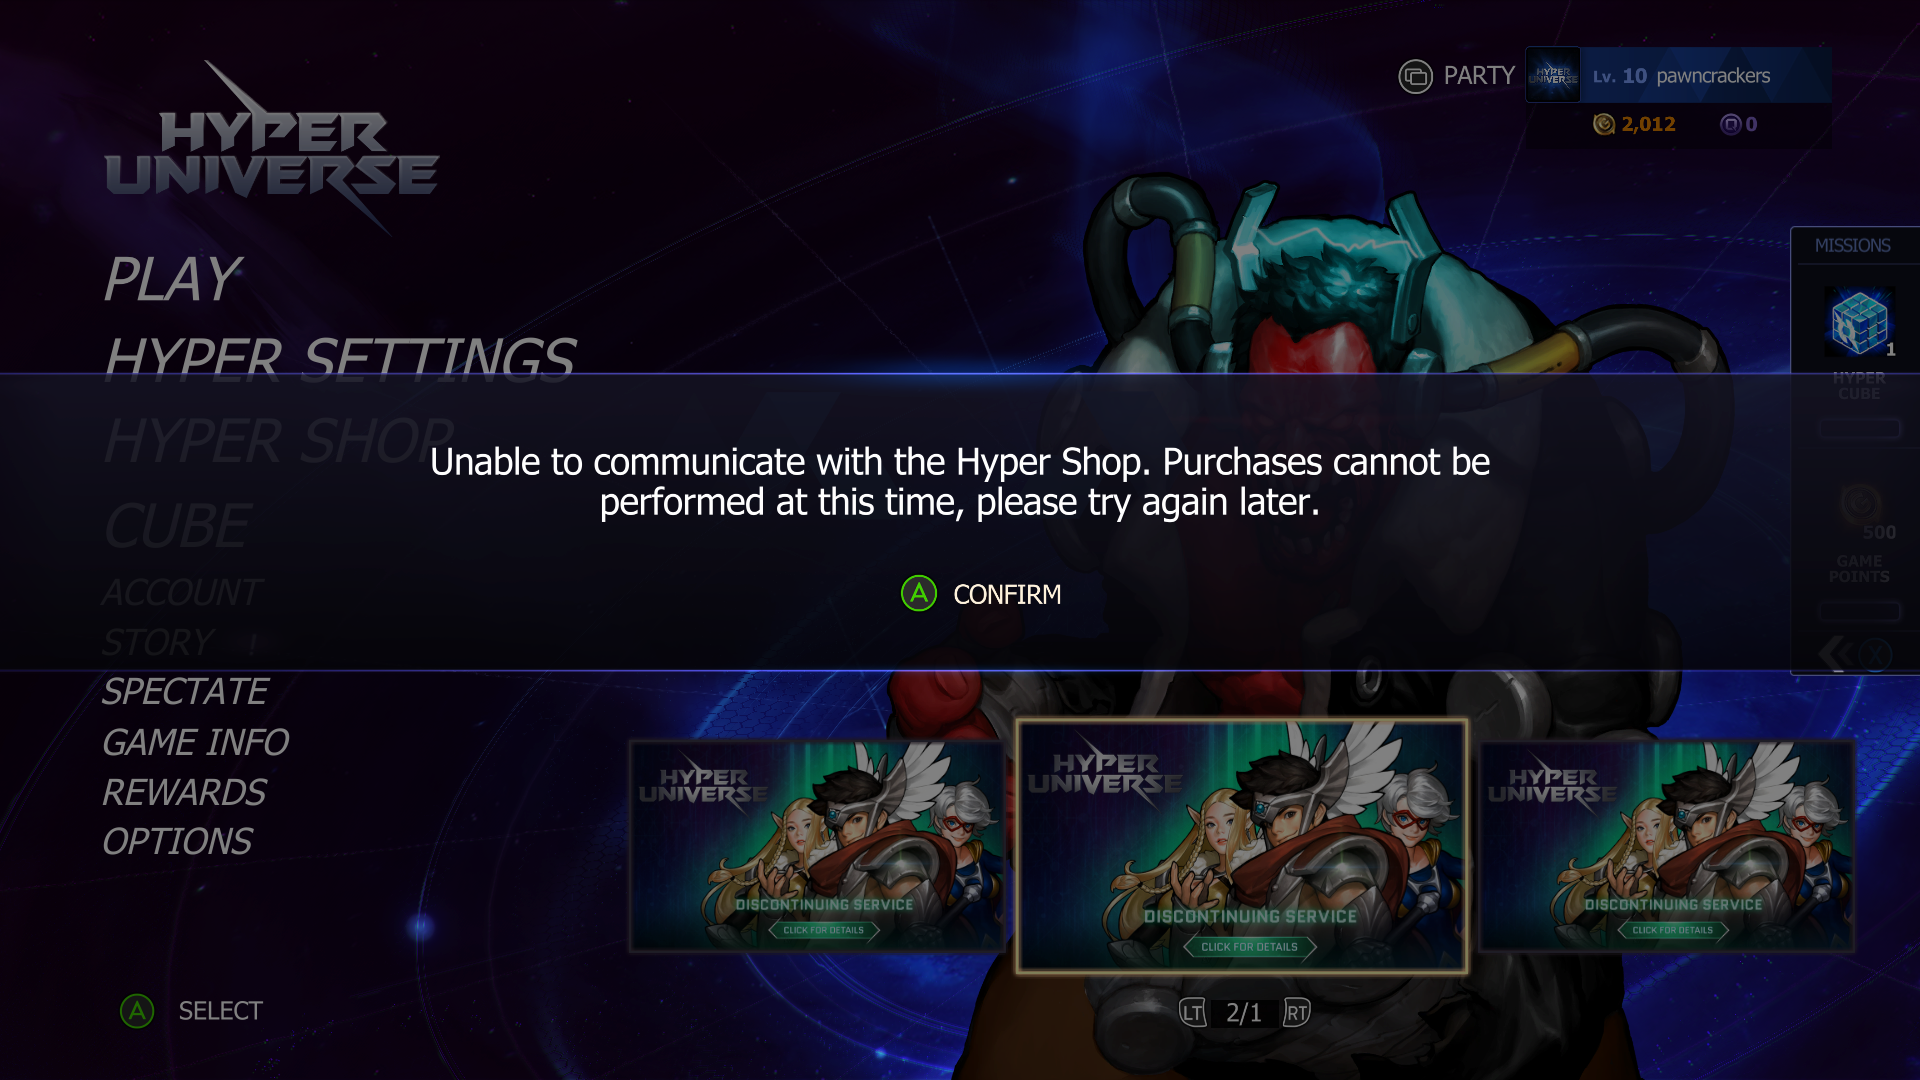 Hyper Universe Xbox One Server issues (as of December 4th 2019) [​IMG]